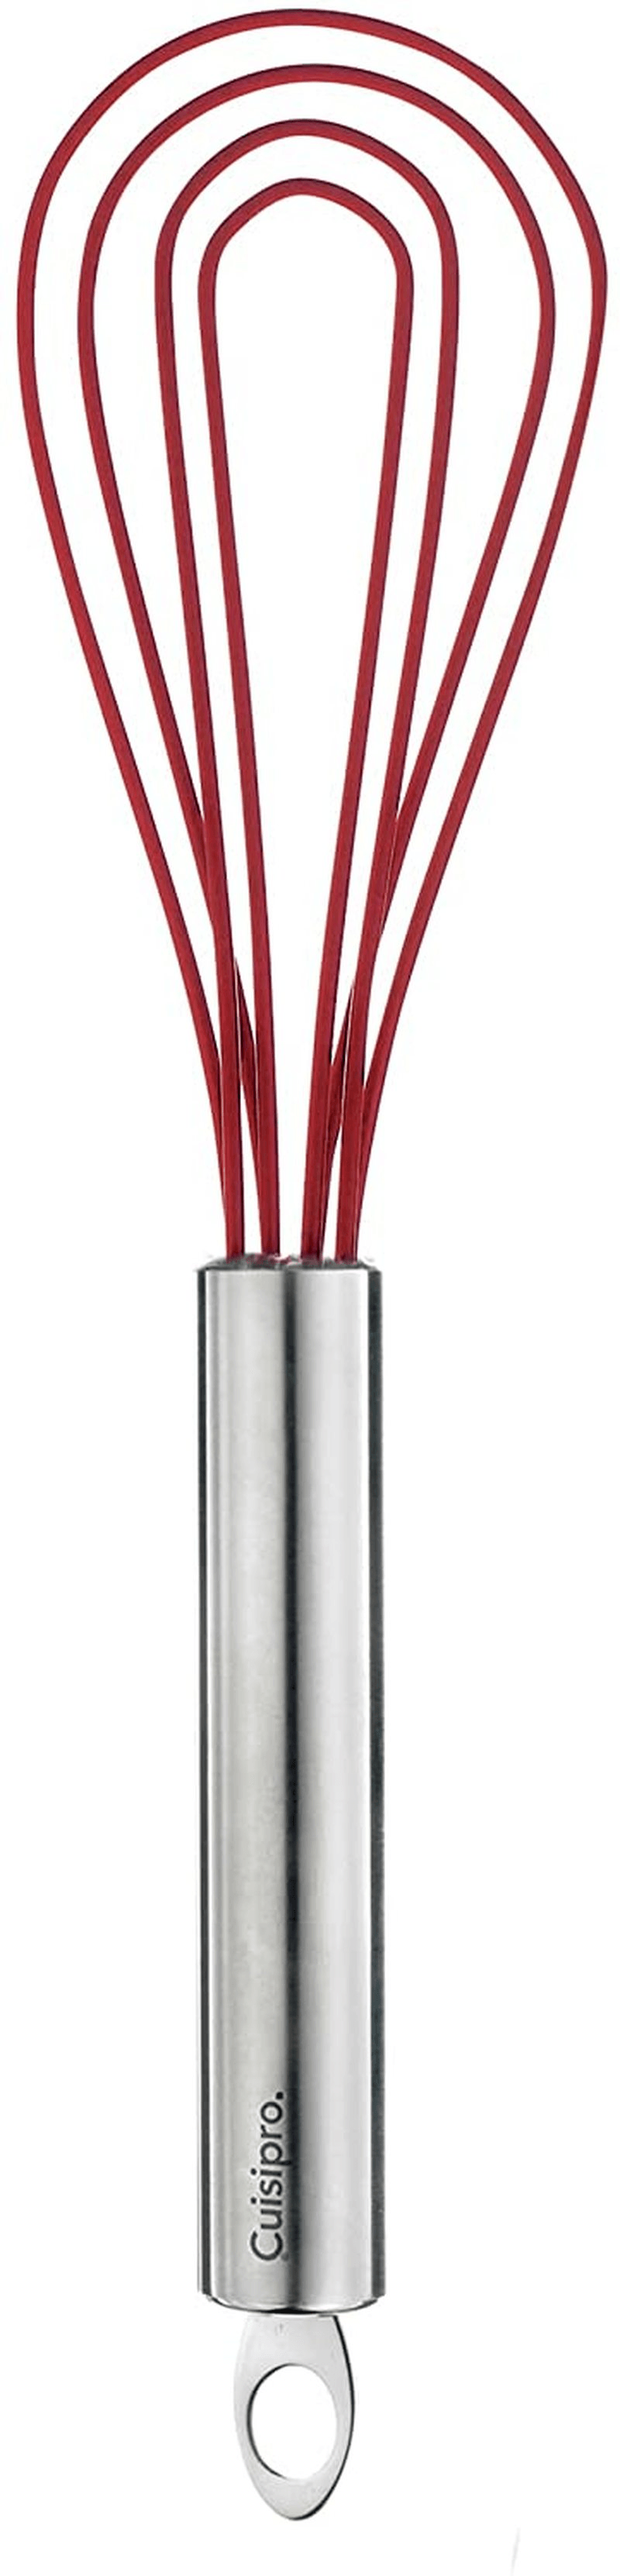 CUISIPRO Cuisipro Flat Whisk 10 Inches Red Stainless Steel 